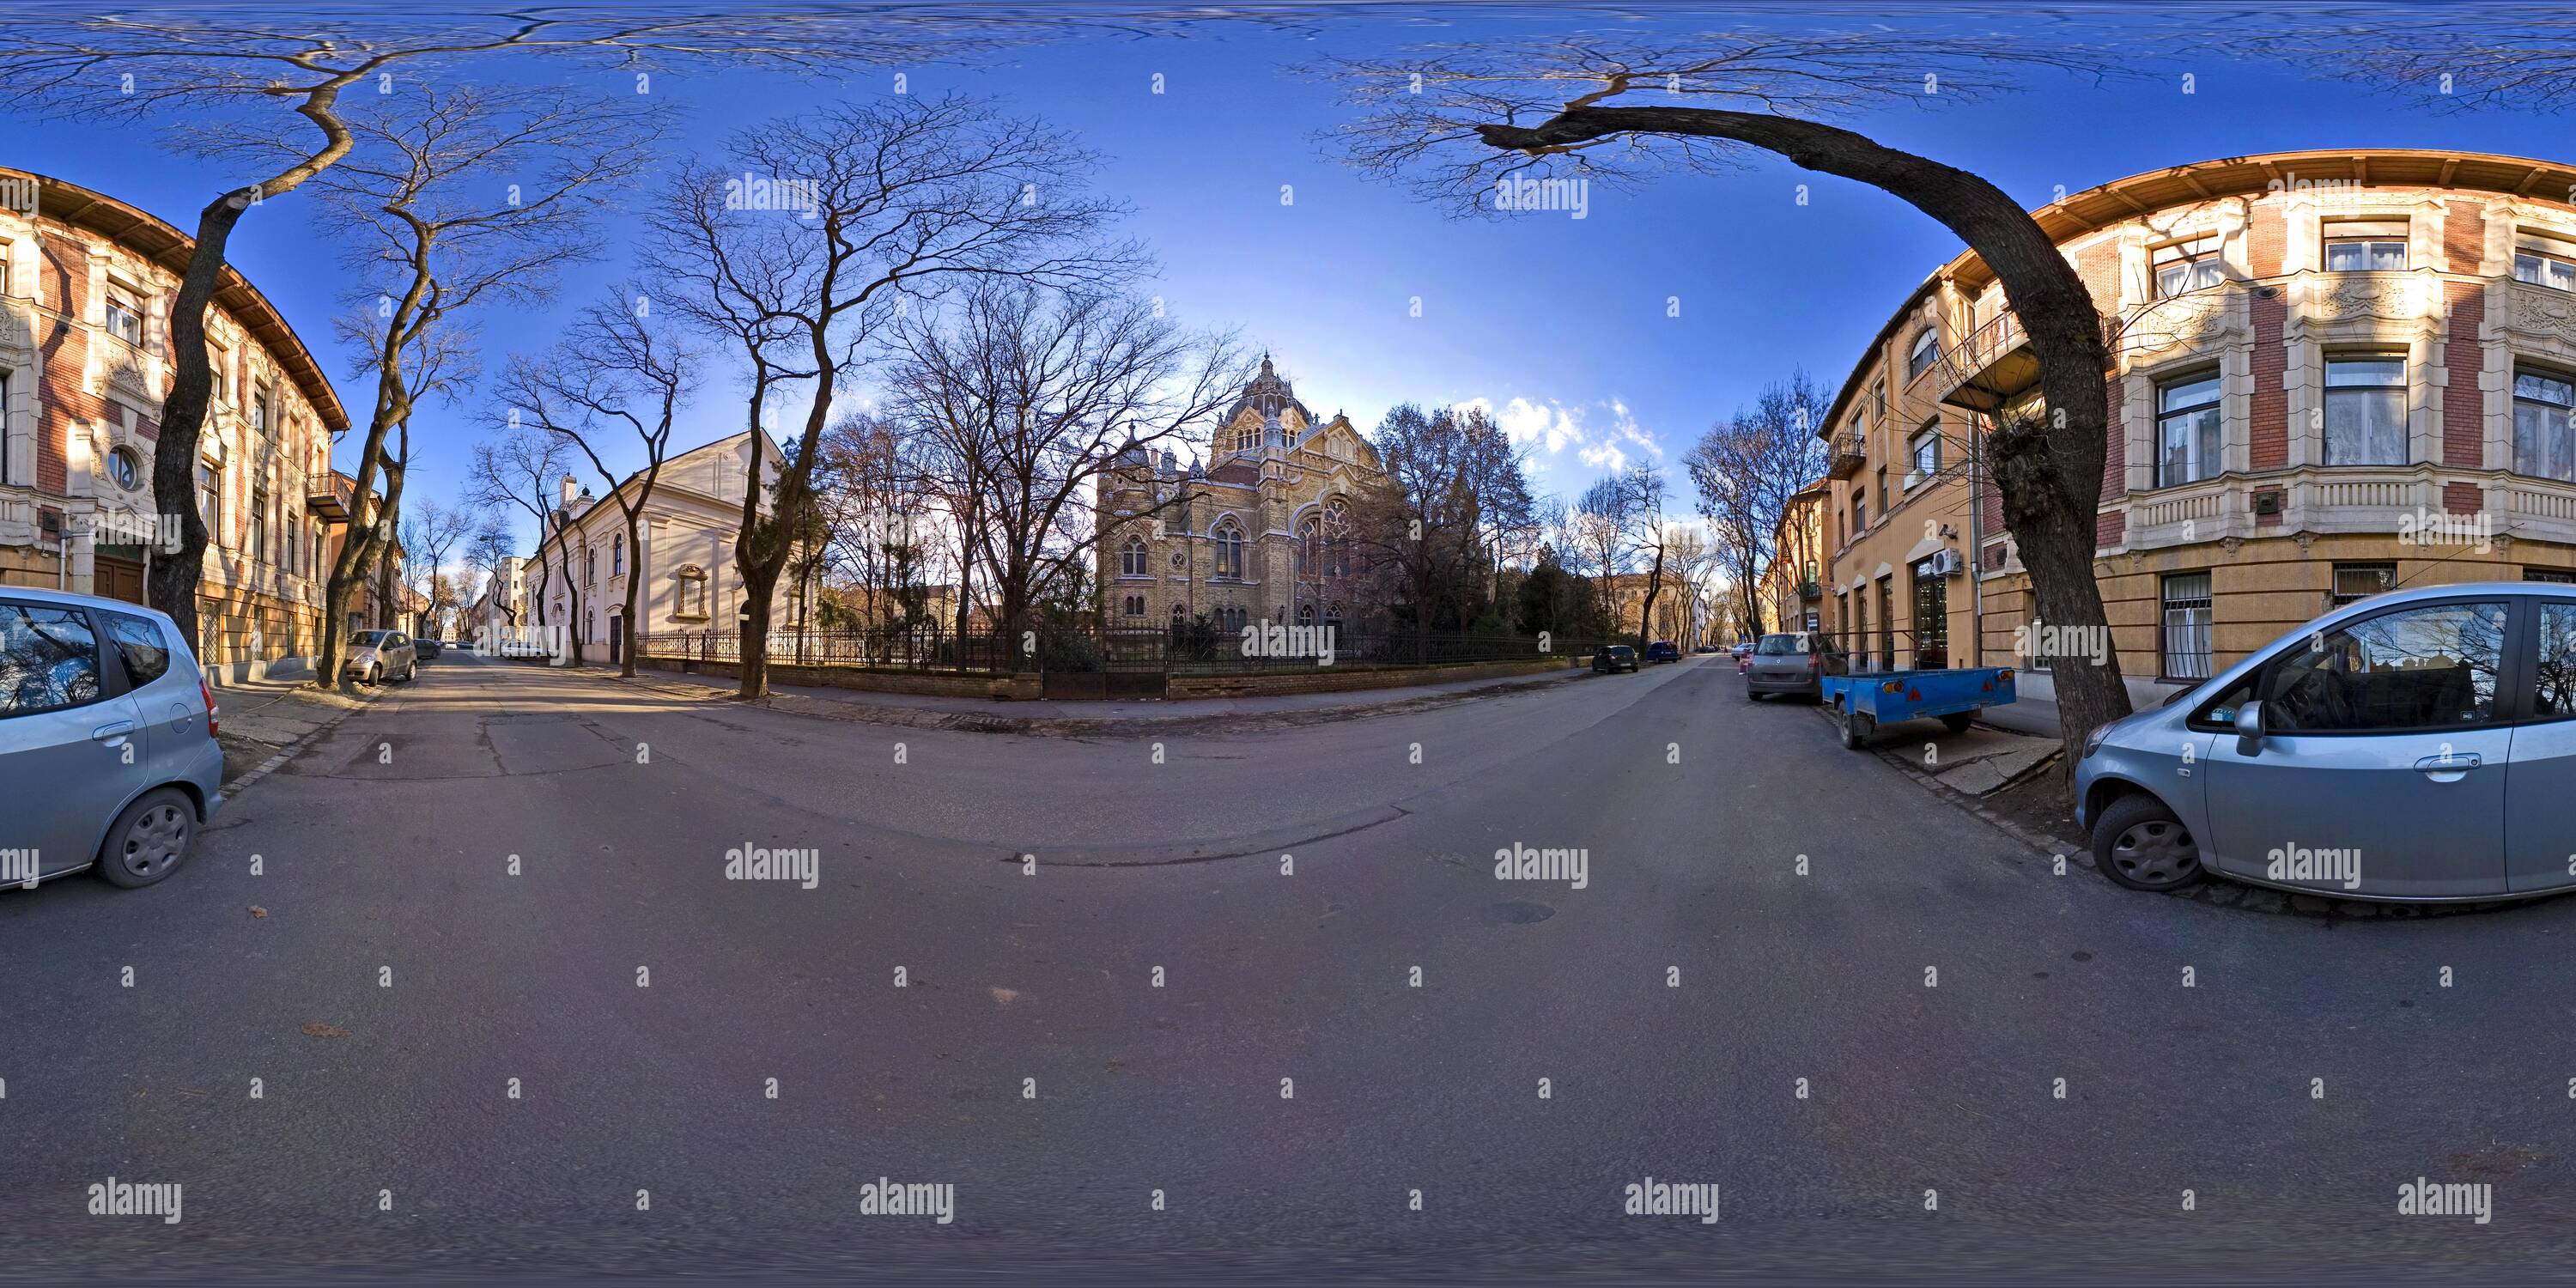 360° View Of Synagogue And The Building Of An Old Synagogue Alamy